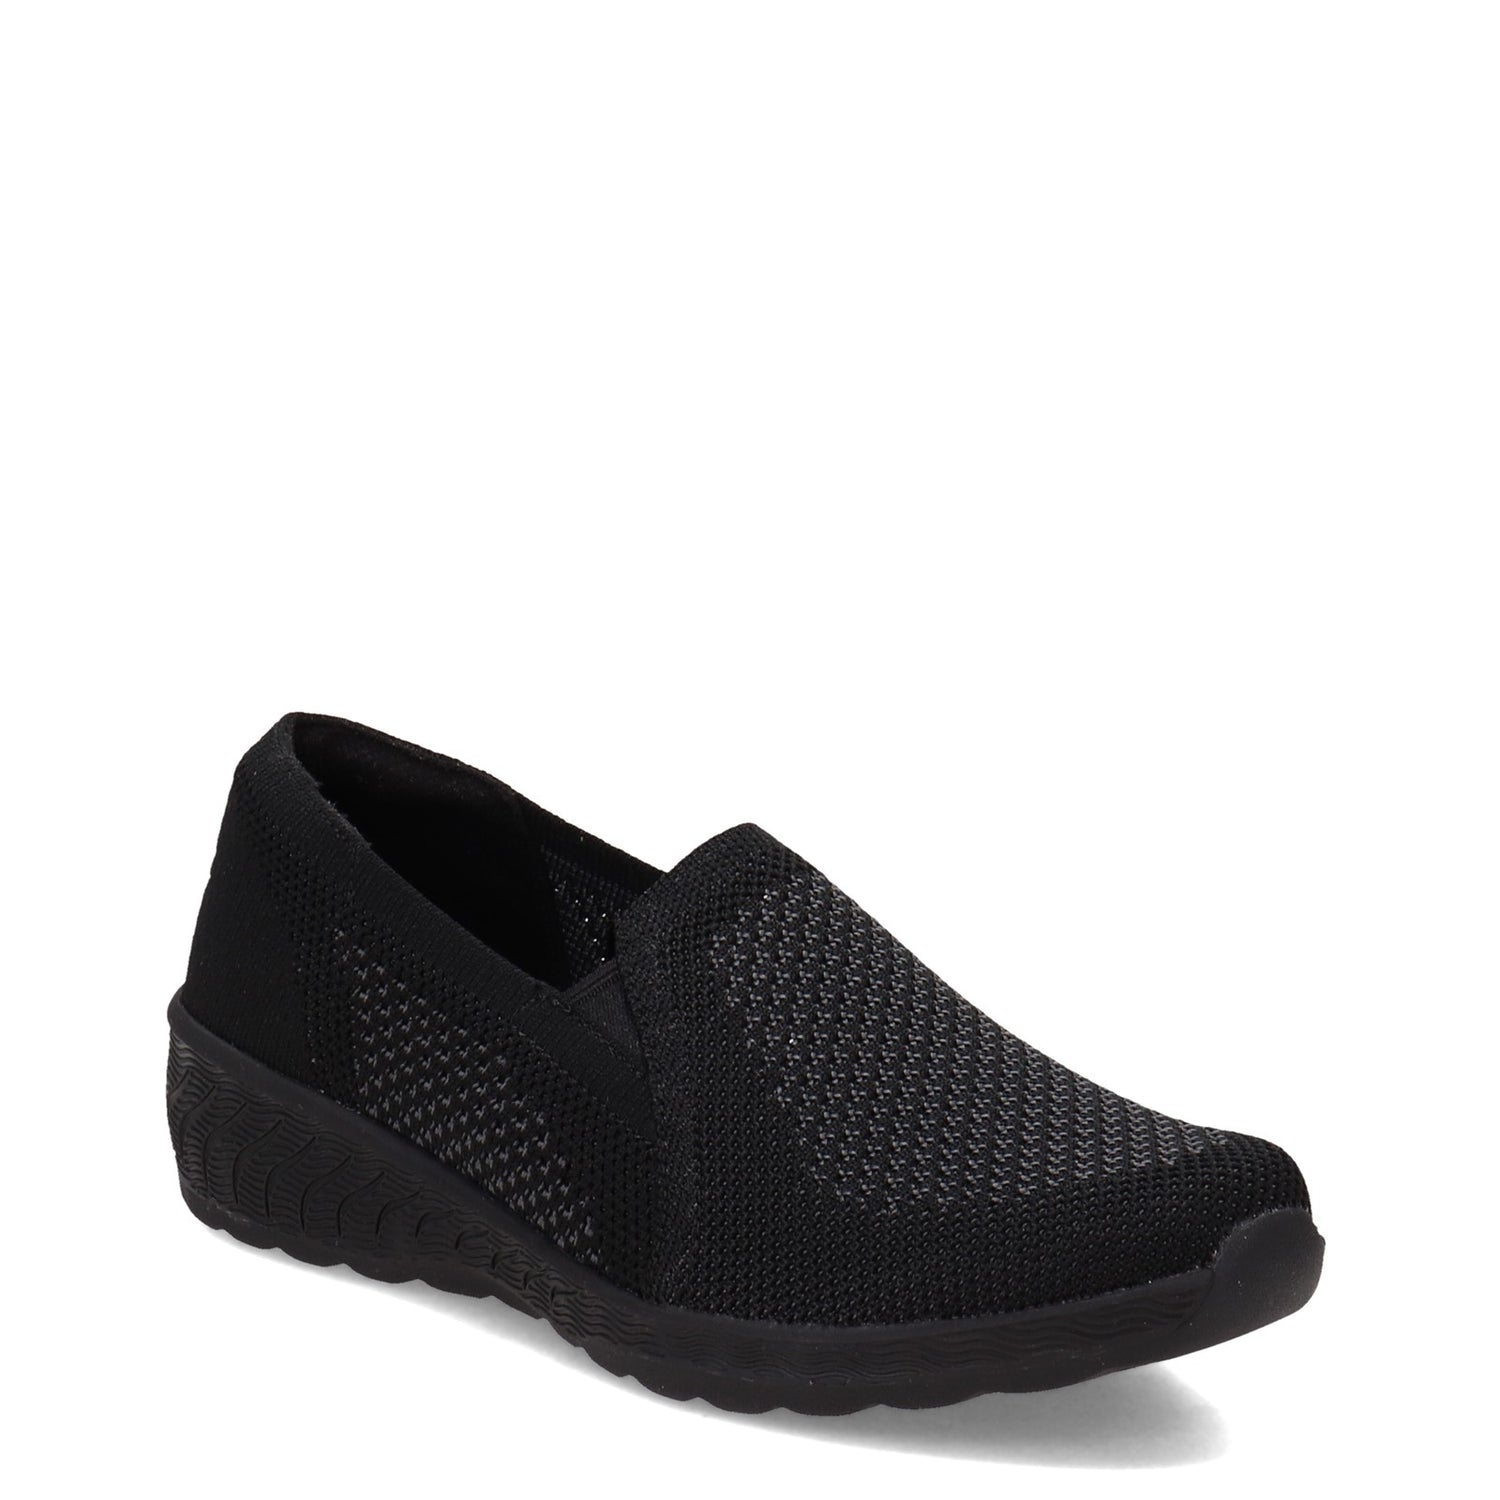 Peltz Shoes  Women's Skechers Relaxed Fit: Up-Lifted - New Rules Slip-On BLACK 100454-BBK